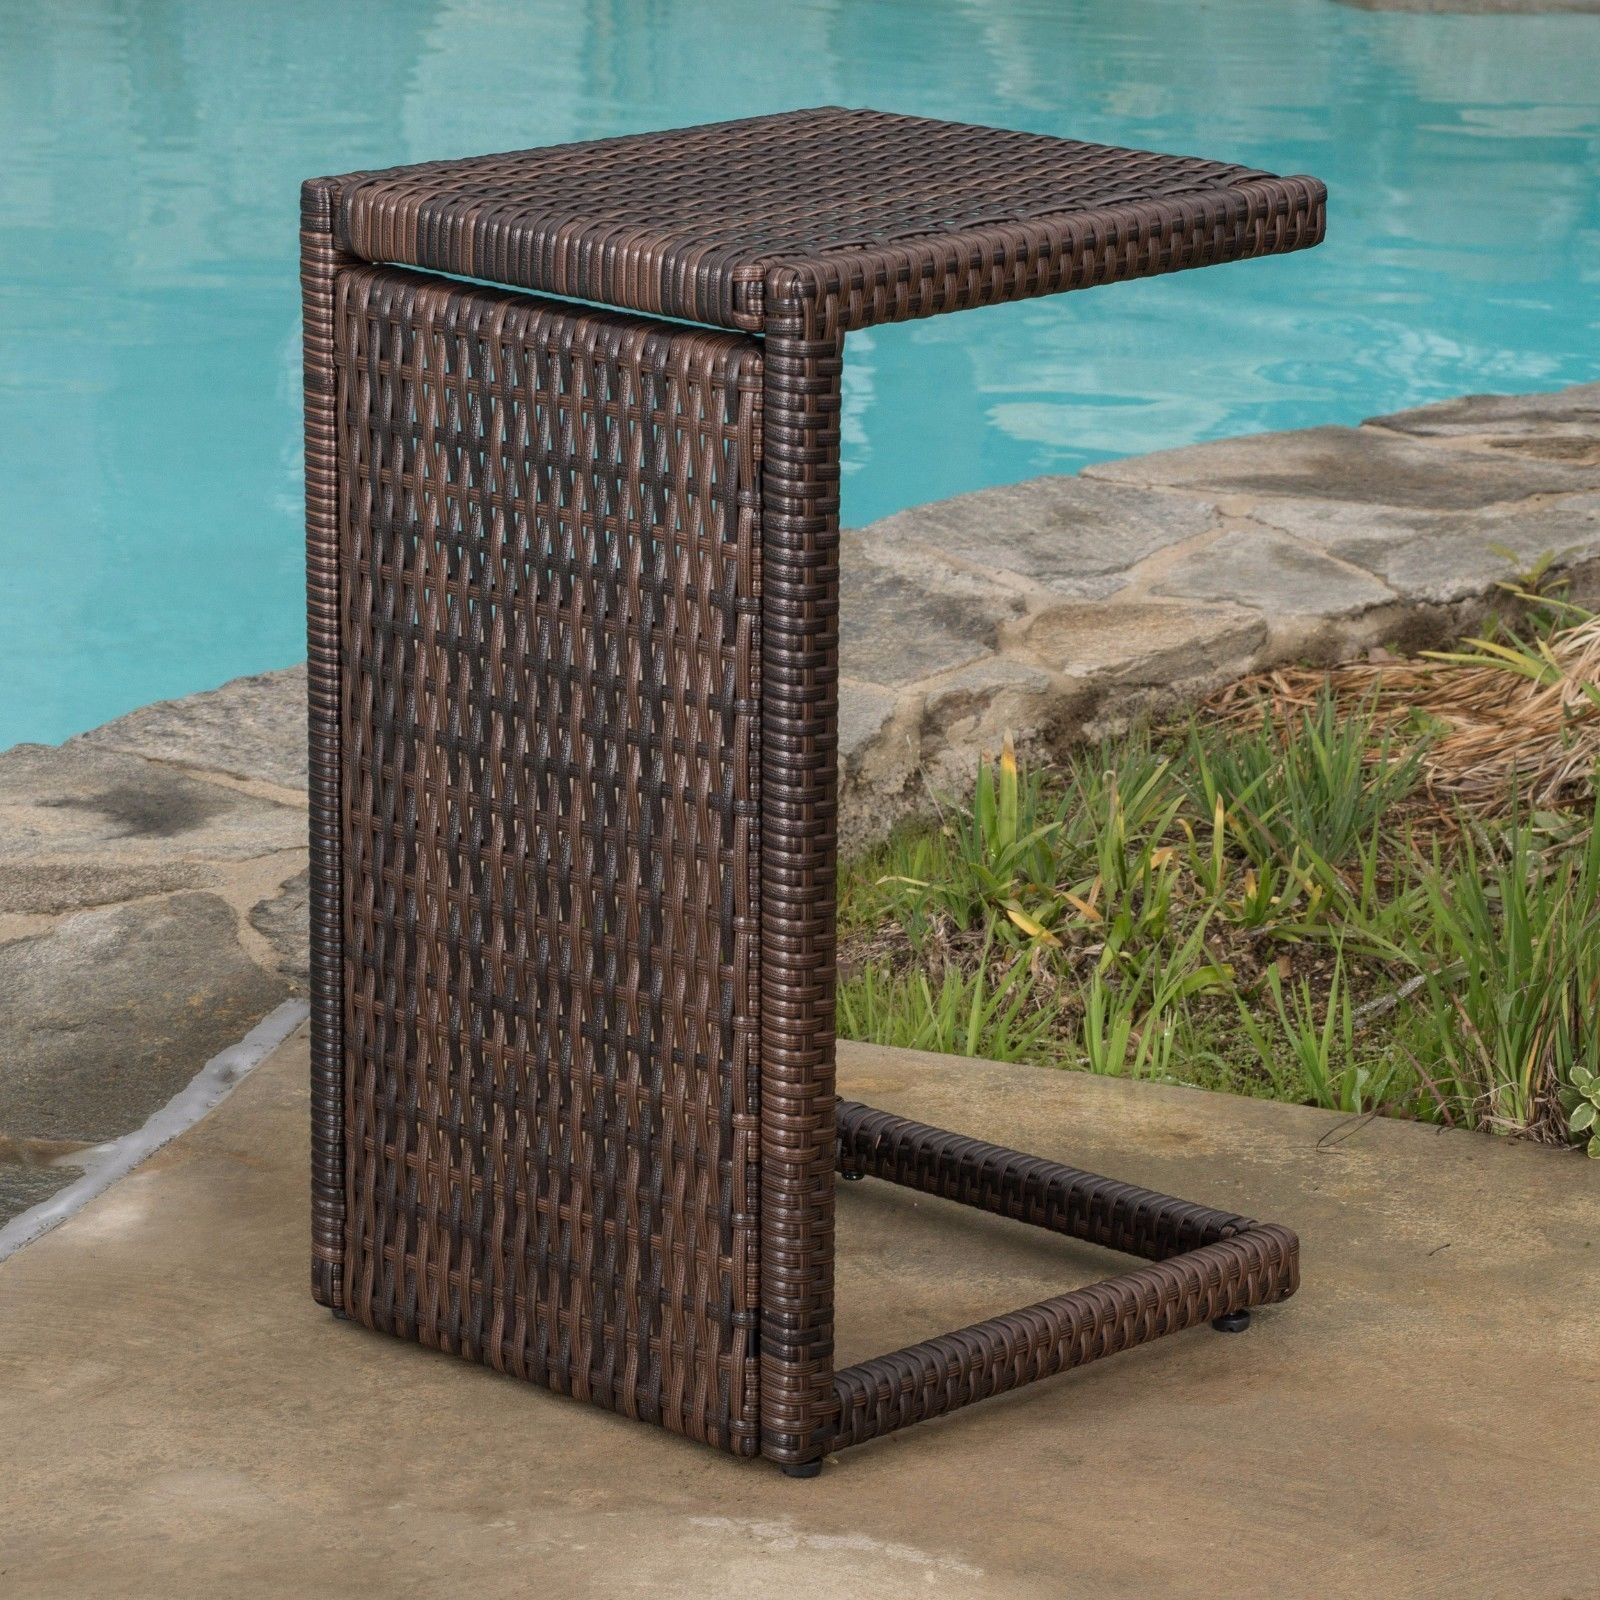 denise austin forrest outdoor wicker accent table great furniture christmas gift target metal side pier one dining patio cooler threshold bar set inch wall clock white end house